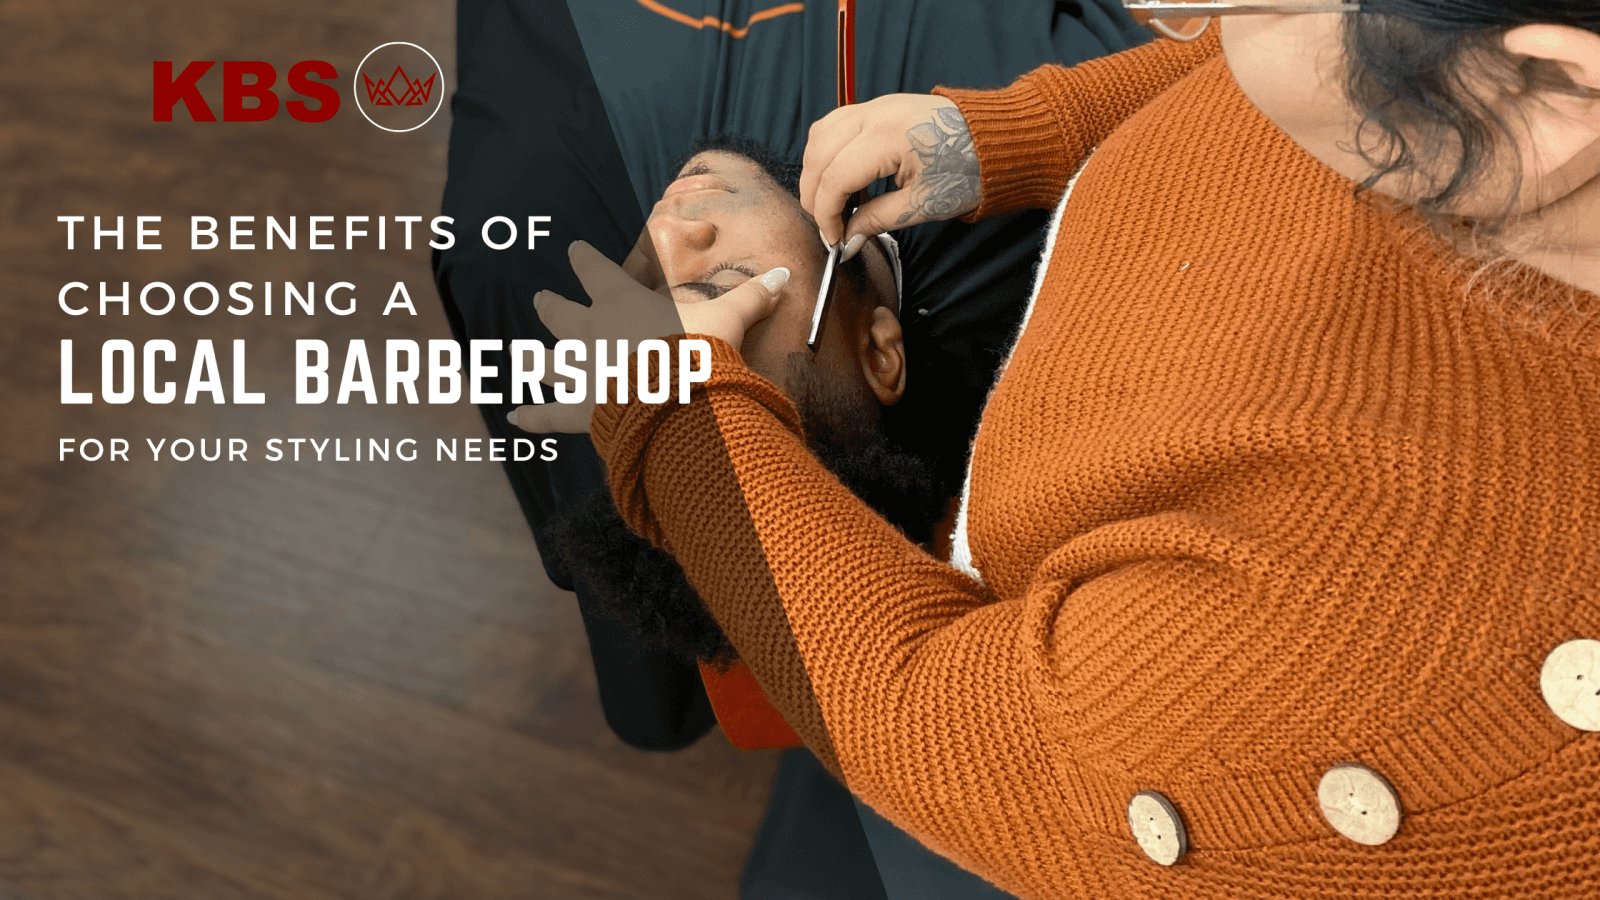 The Benefits of Choosing a Local Barbershop